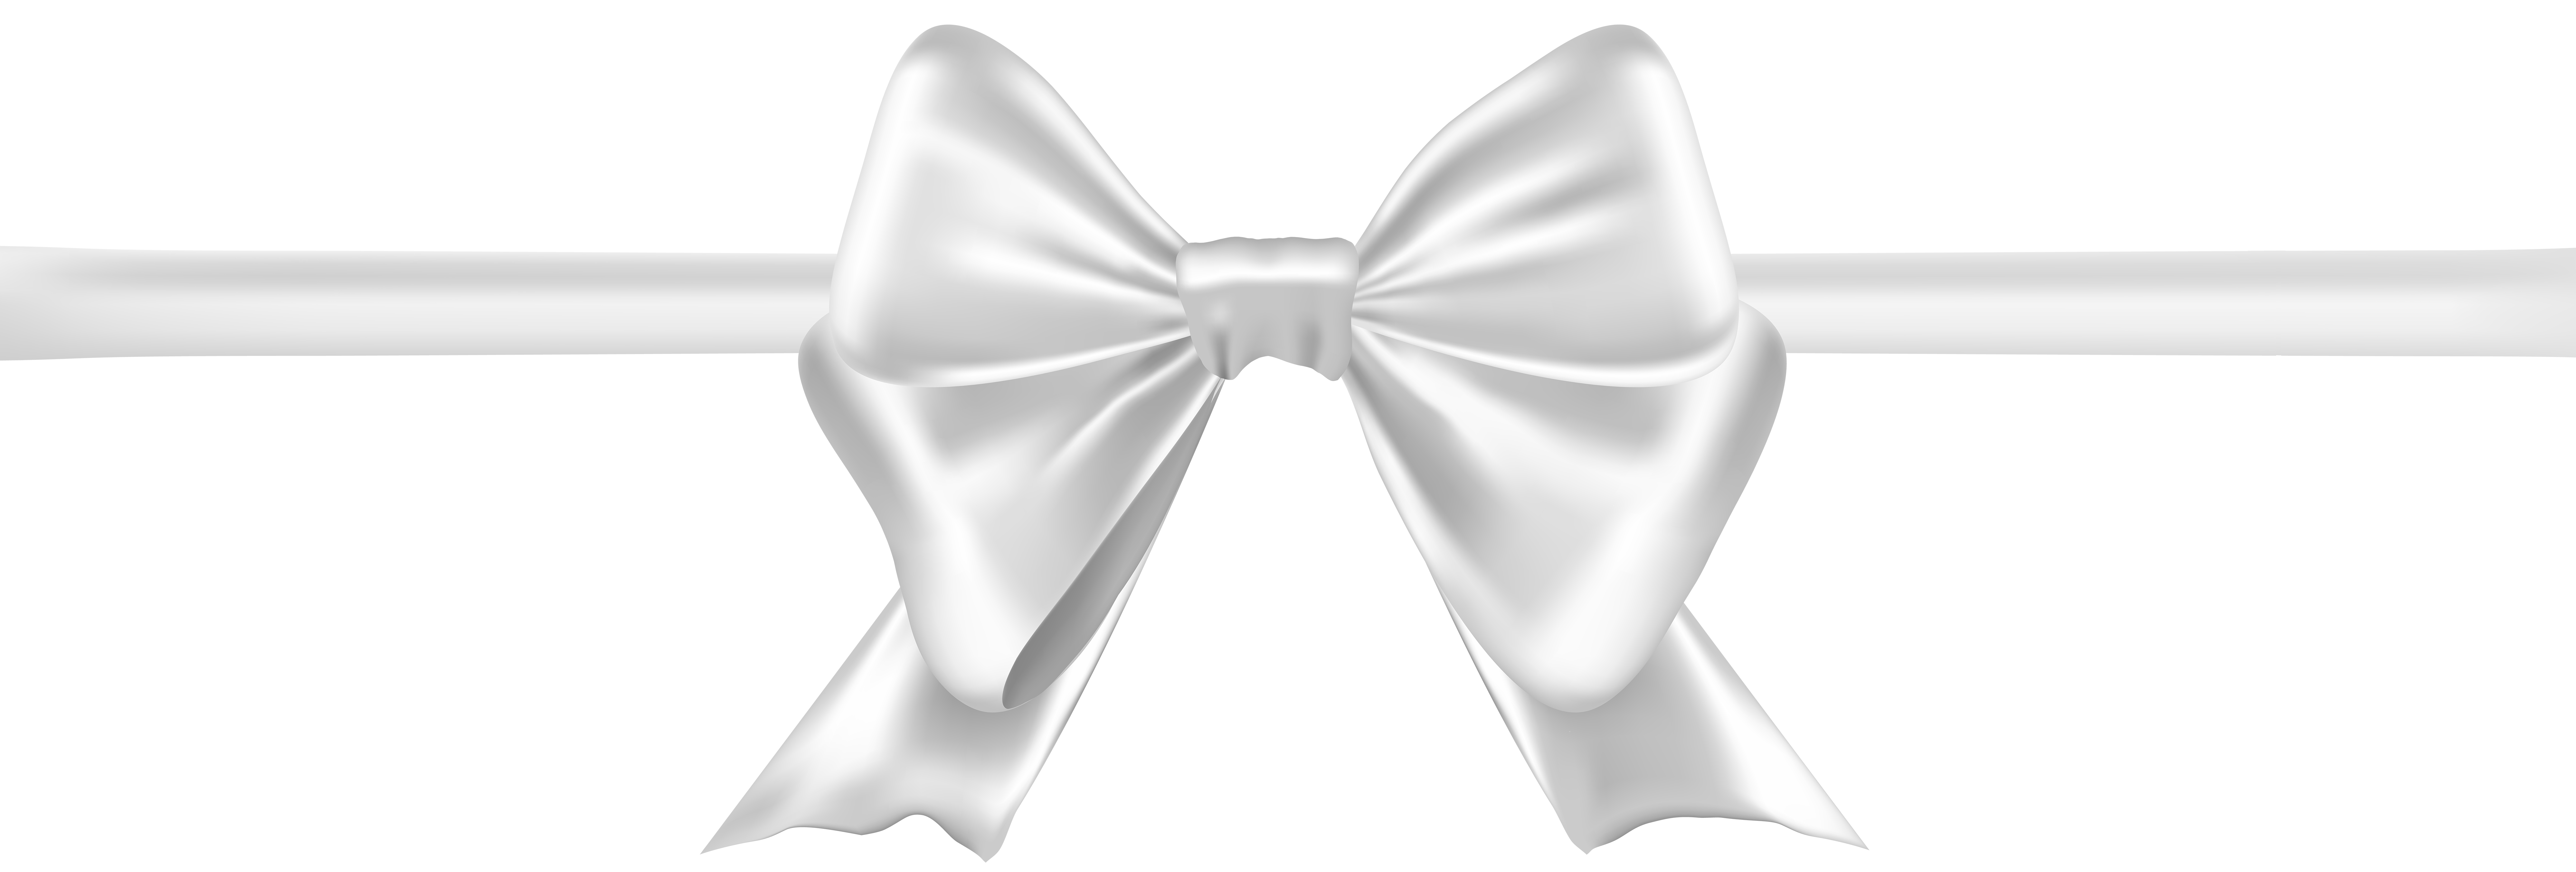 Bow White Transparent Clip Art Image | Gallery Yopriceville - High